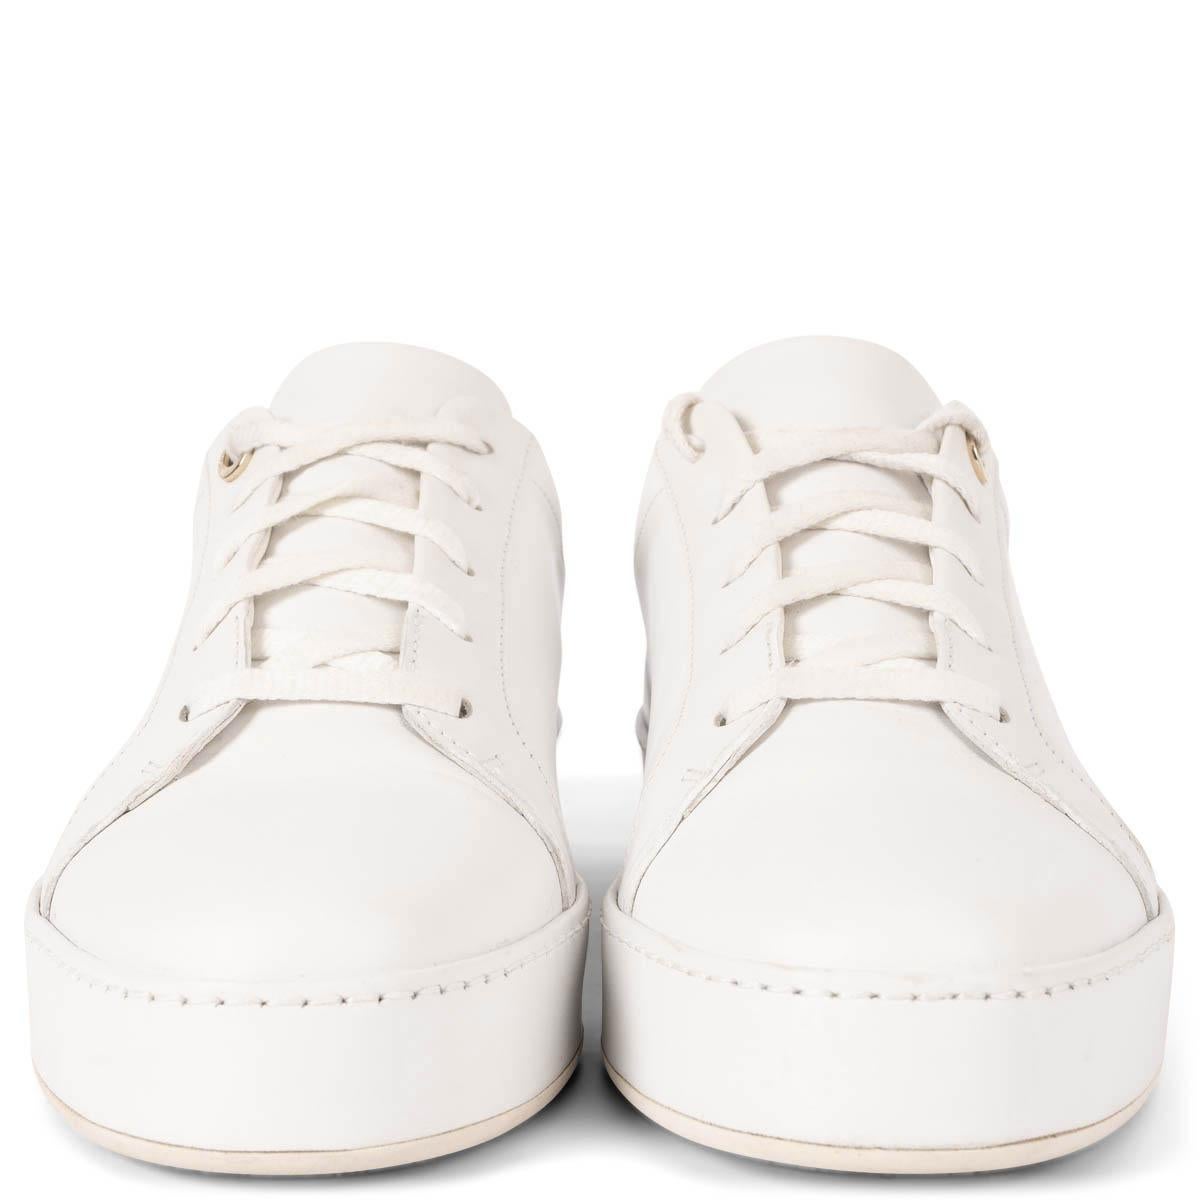 100% authentic Loro Piana Nuages sneakers in white leather with a leather wraped platform rubber sole. Have been worn and show very faint darker marks. Overall in excellent condition. 

Measurements
Imprinted Size	41
Shoe Size	40
Inside Sole	27cm